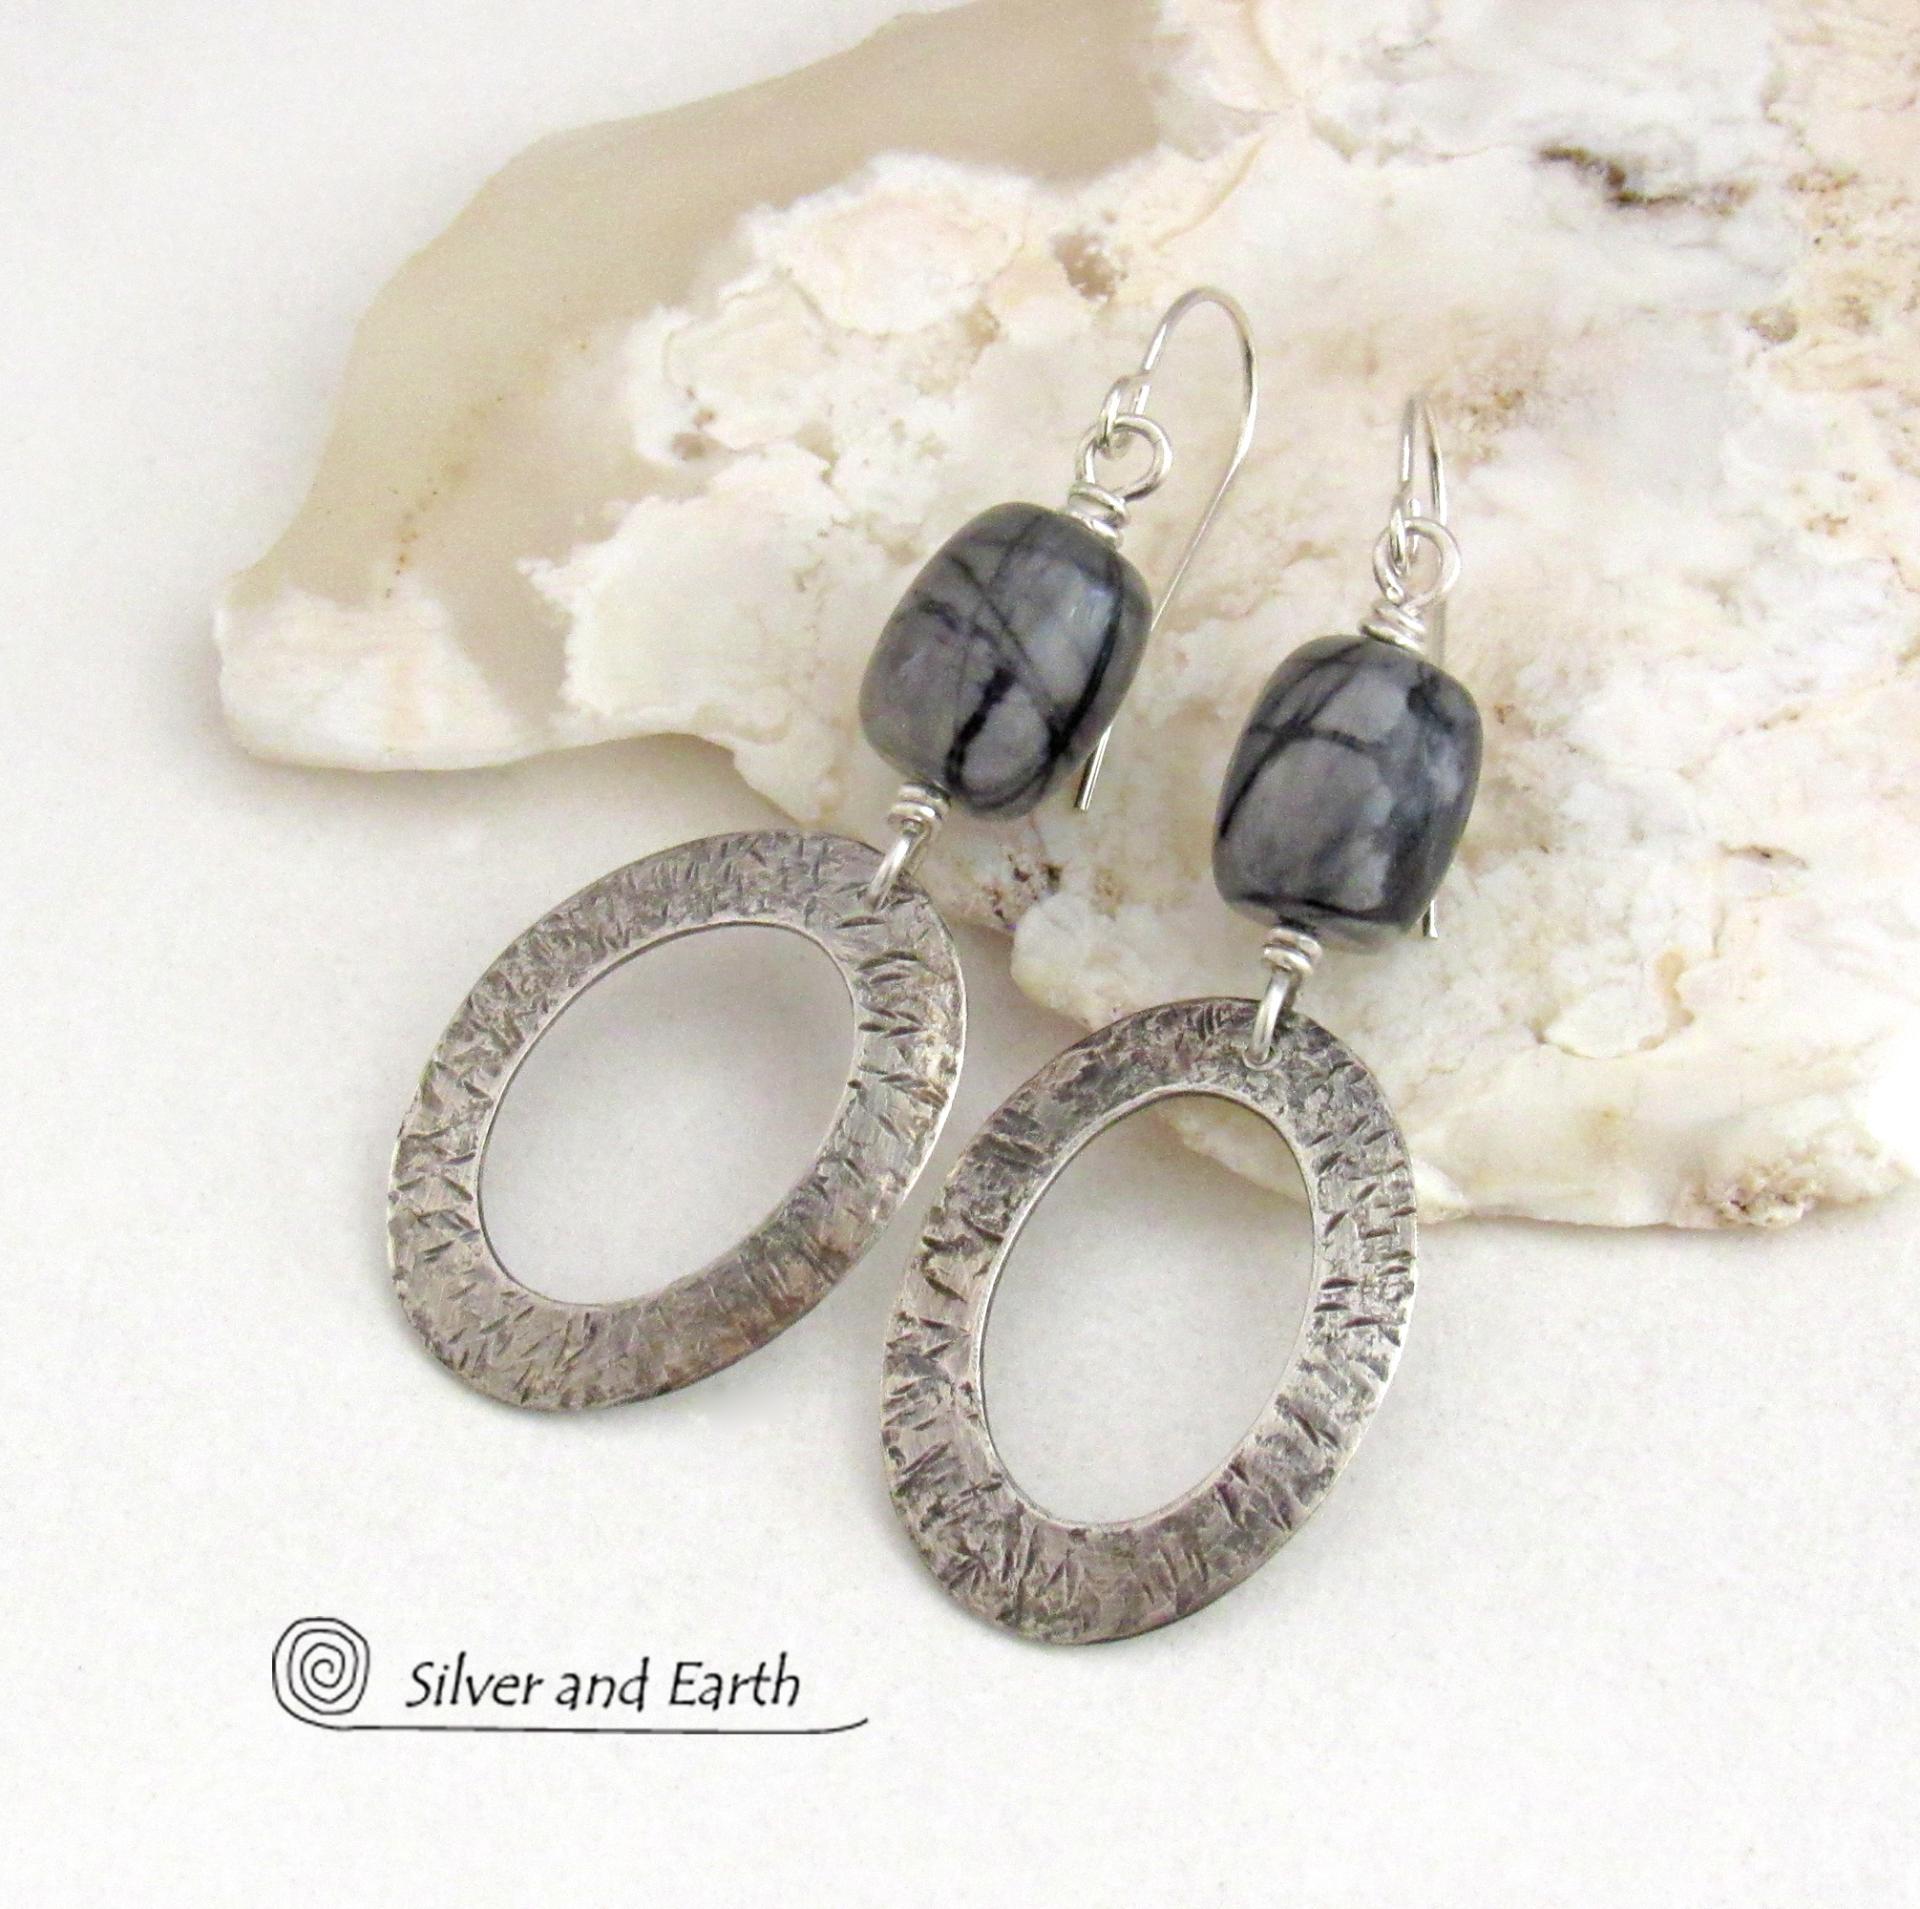 Sterling Silver Dangle Earrings with Grey Black Picasso Marble Gemstones - Artisan Handmade Earthy Natural Stone Jewelry